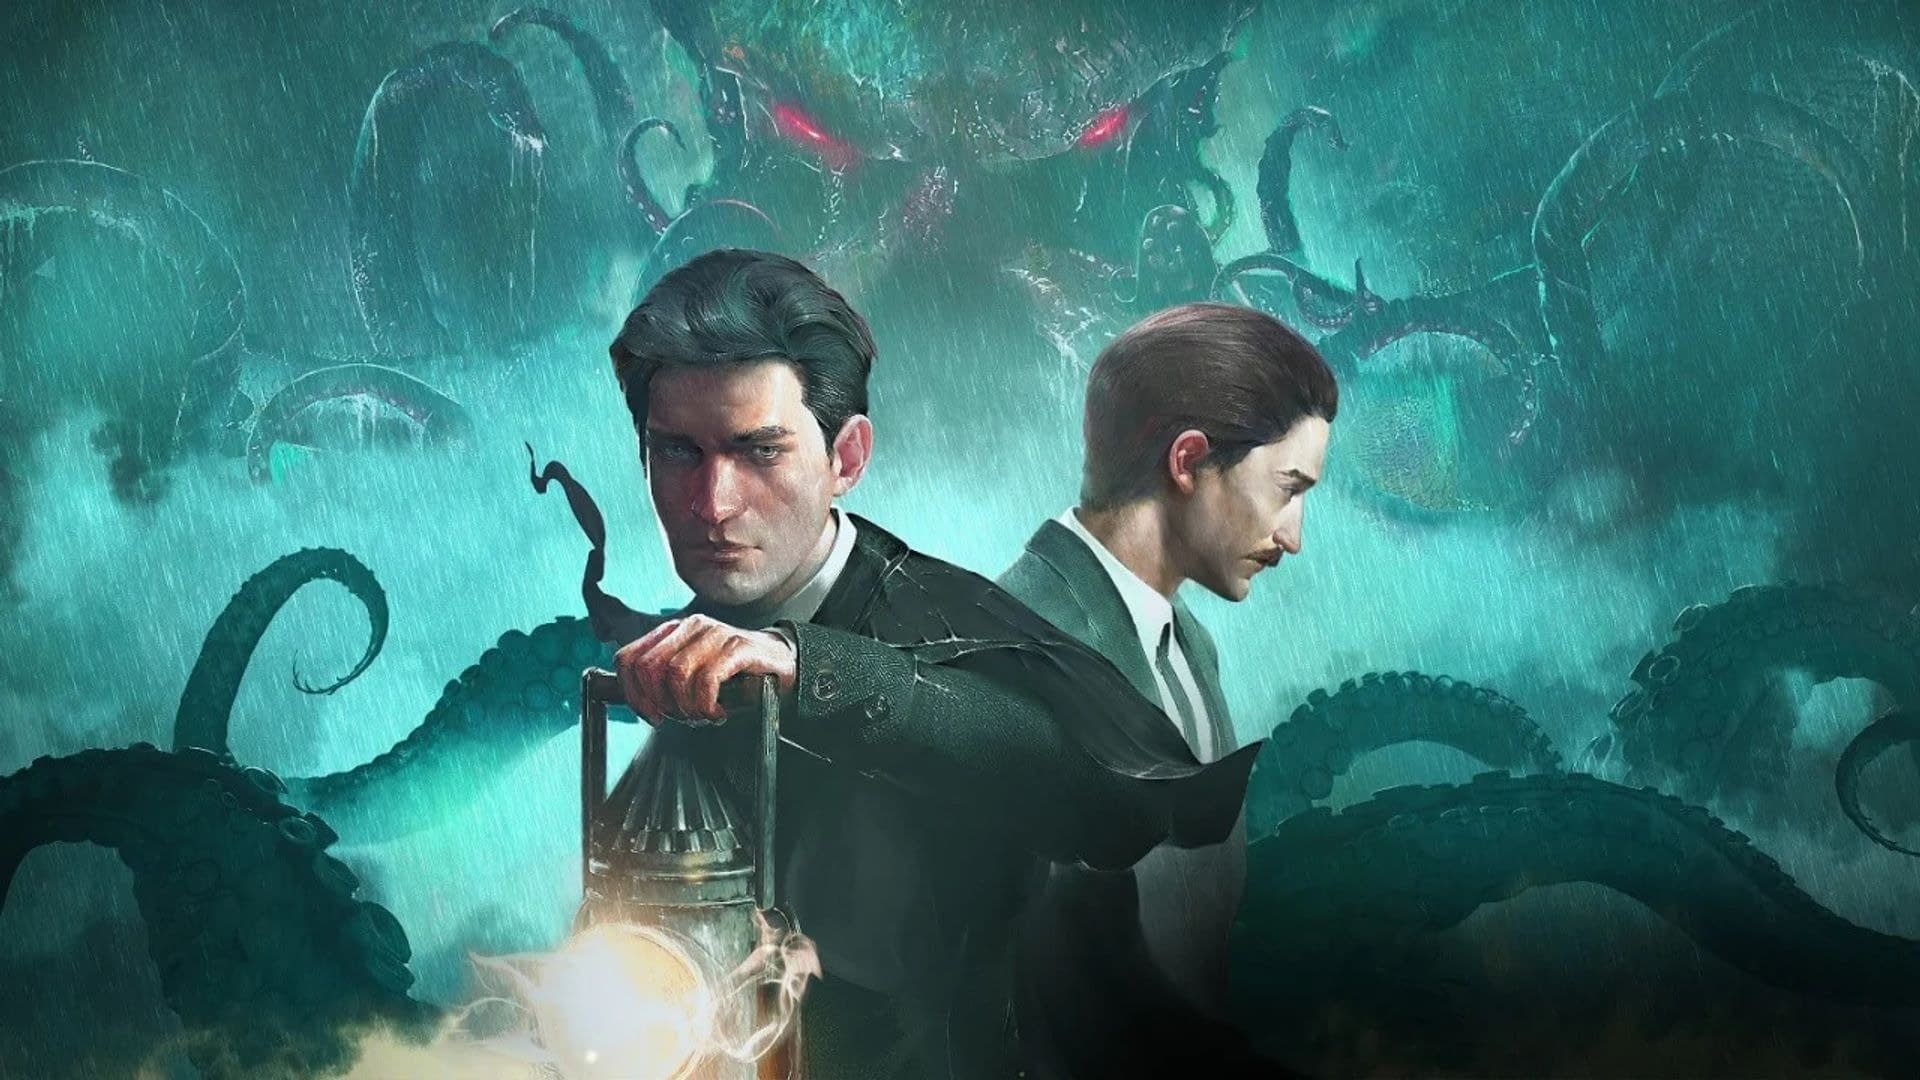 Sherlock Holmes: The Awakened Remake’s release date is announced